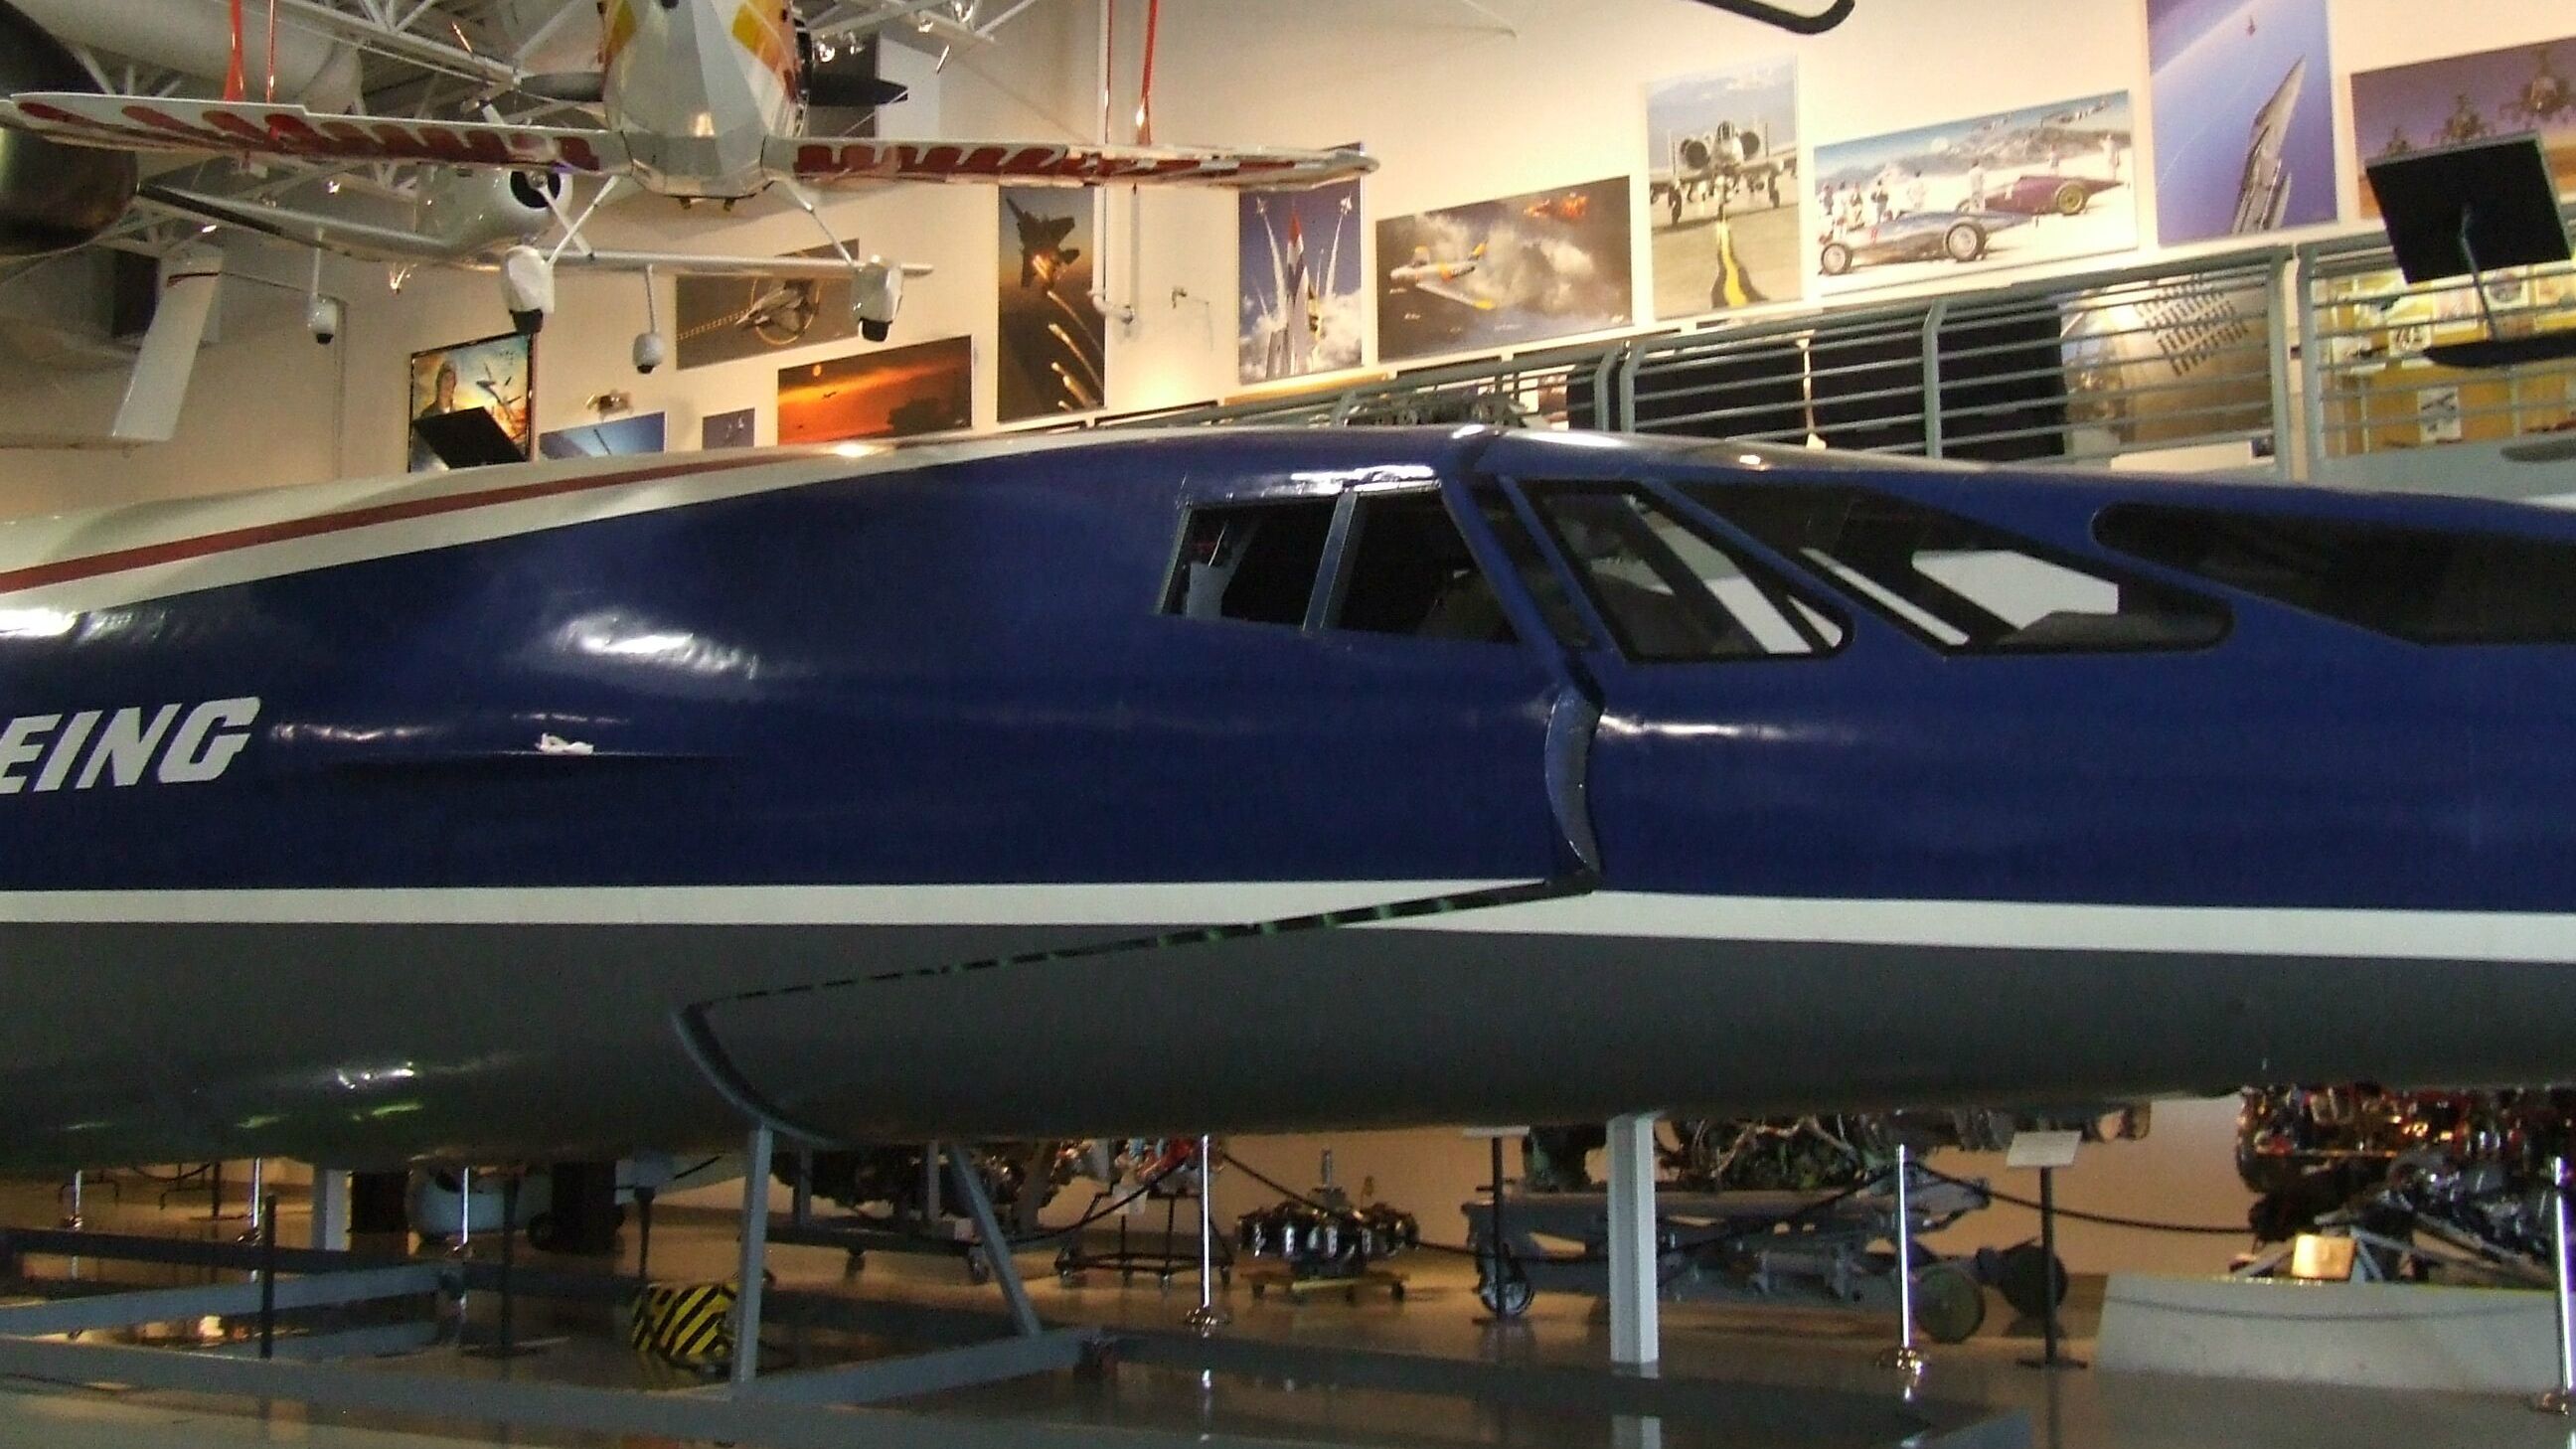 Boeing 2707 SST – Supersonic Transport at the Hiller Aviation Museum California